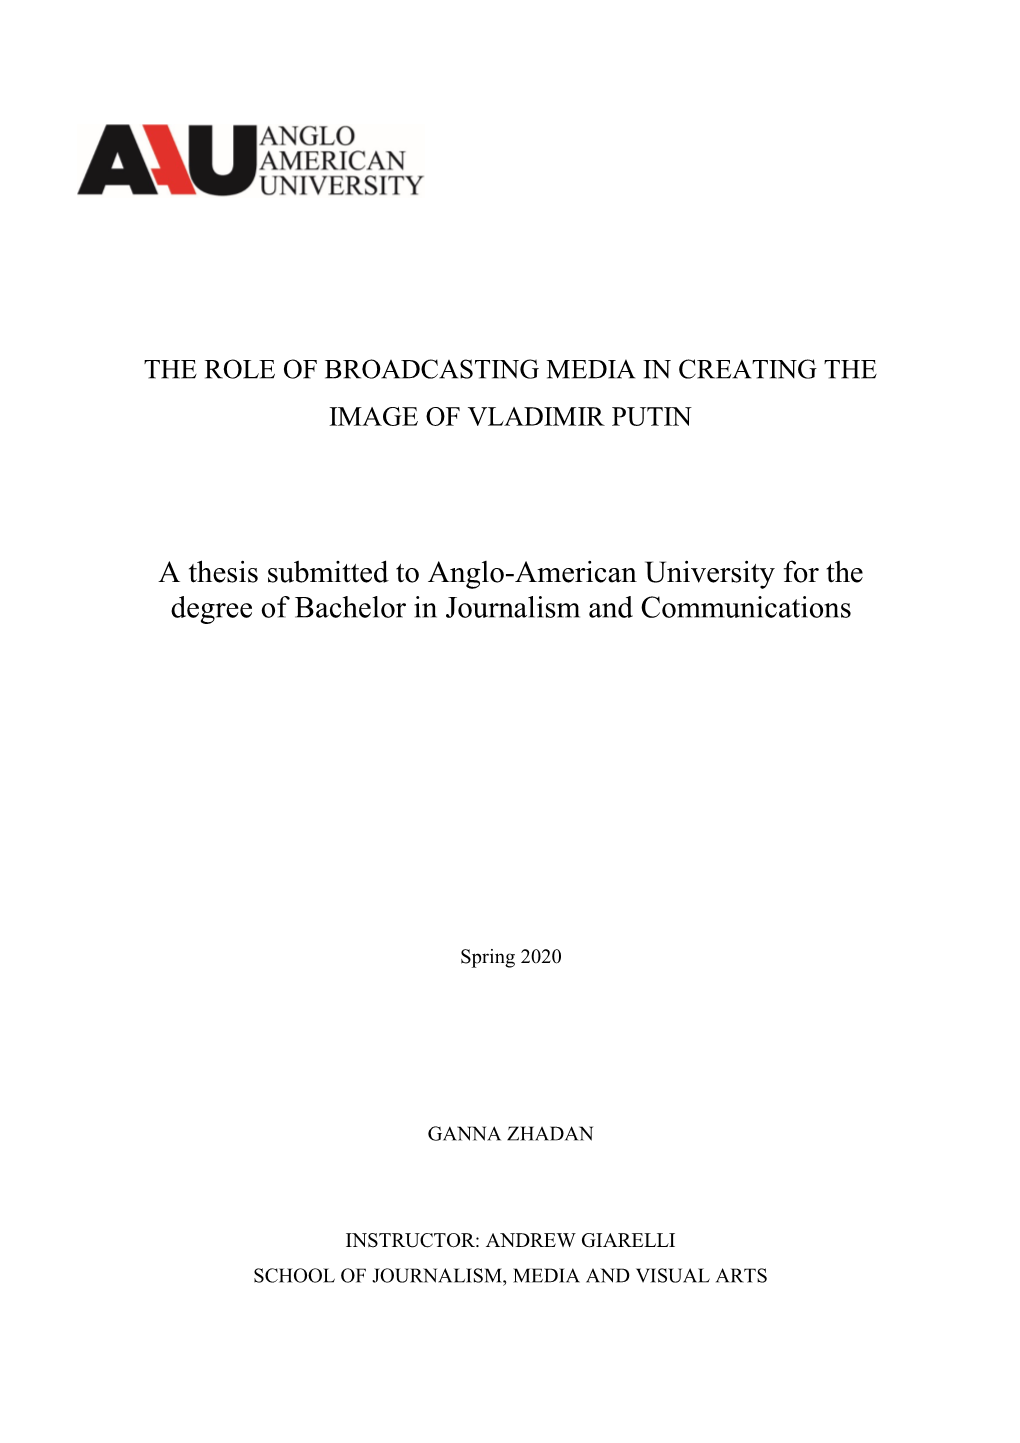 A Thesis Submitted to Anglo-American University for the Degree of Bachelor in Journalism and Communications